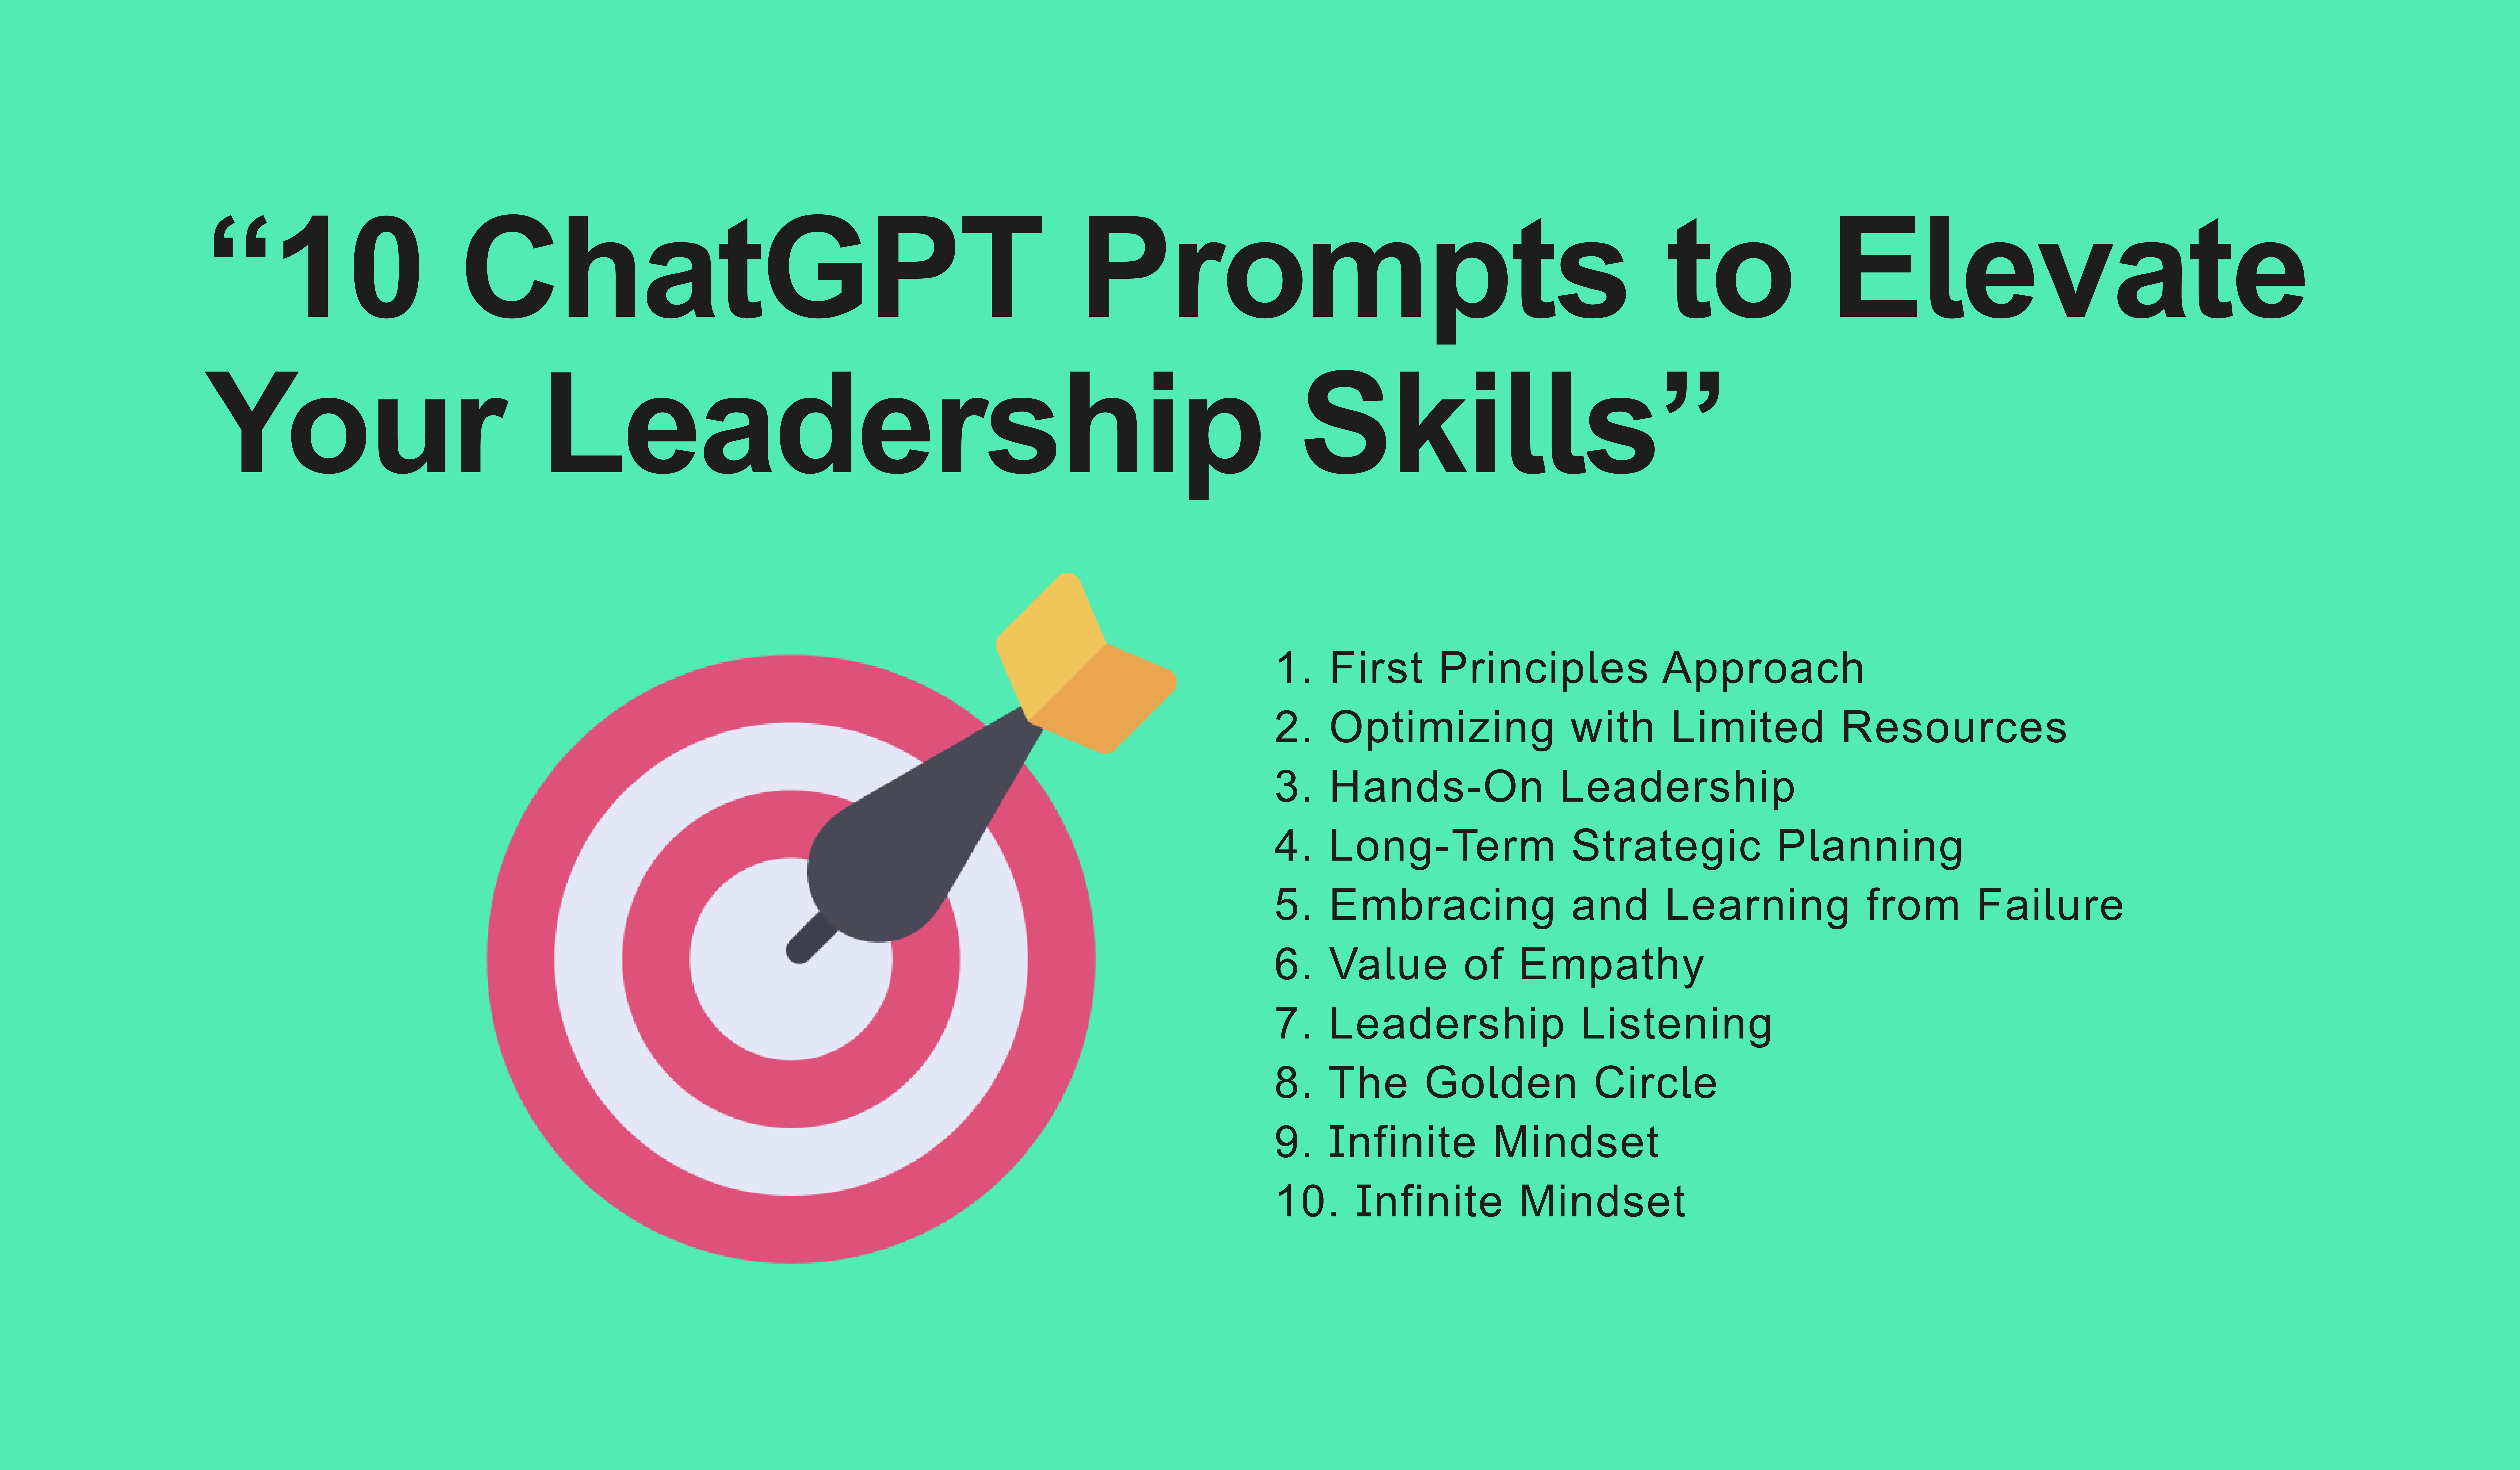 Here's 10 ChatGPT prompts to elevate your leadership skills, must know!